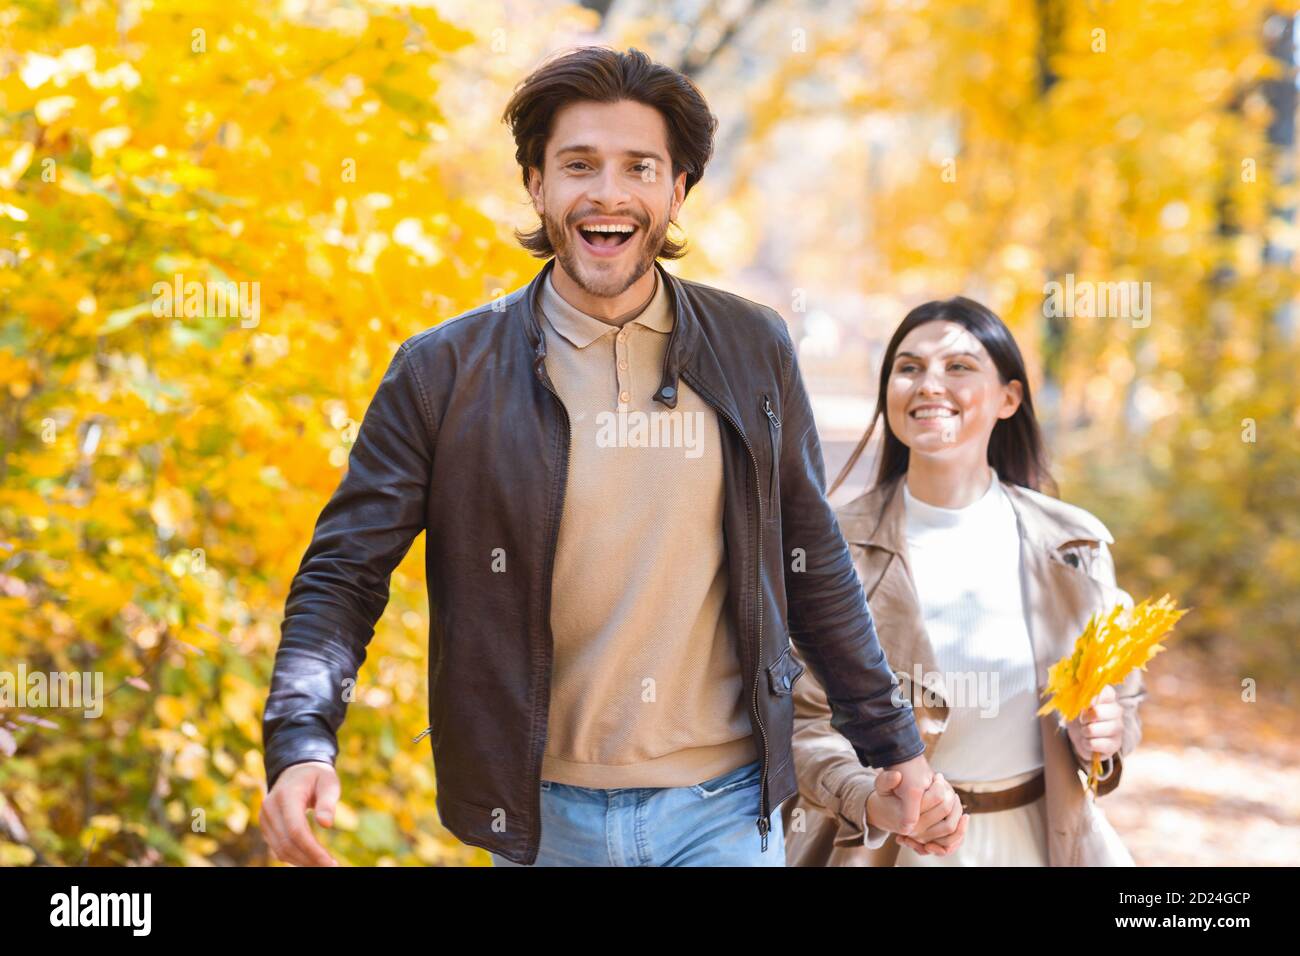 Emotional guy running buy golden forest with his girlfriend Stock Photo